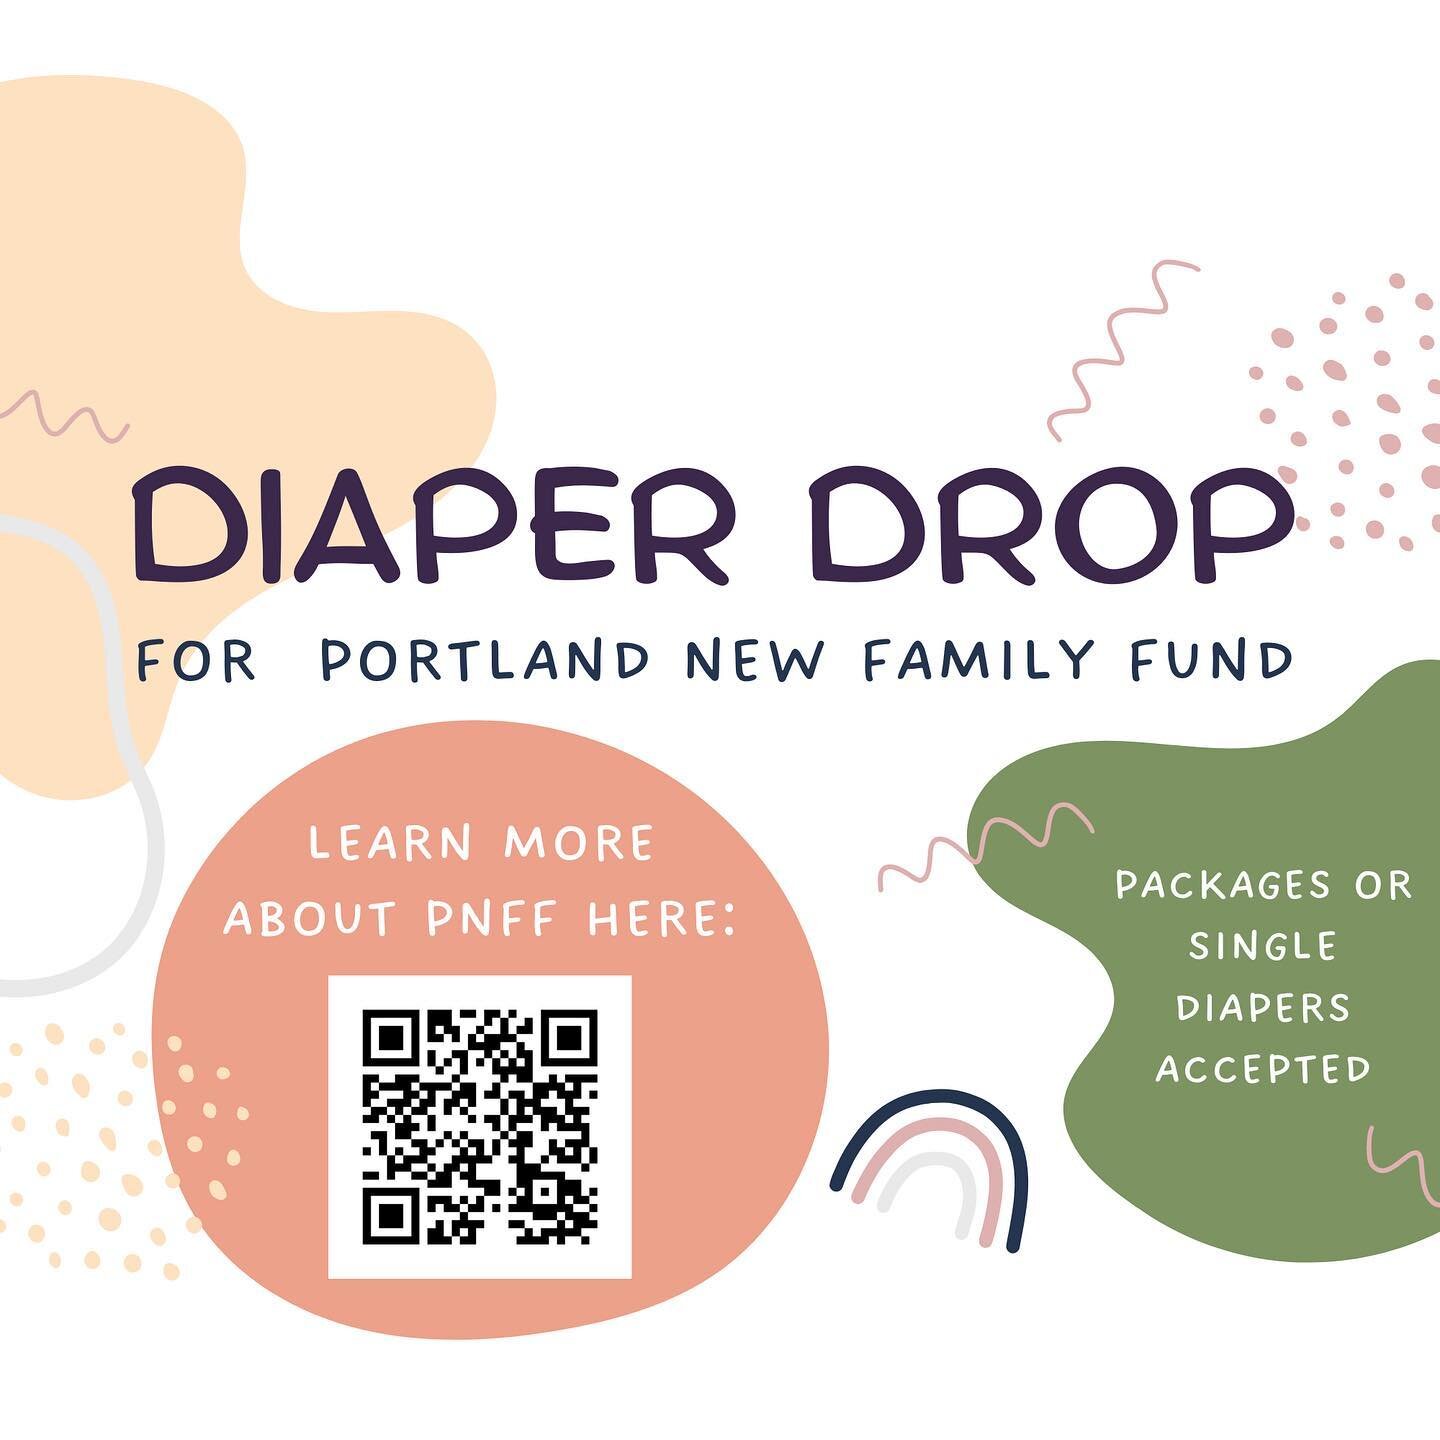 Join us in supporting @portlandnewfamilyfund !

Portland new family funds mission is to 
provide financial assistance to low-income parents for birth doulas, postpartum doulas and newborn lactation/feeding services. 

At Luna we have a diaper donatio